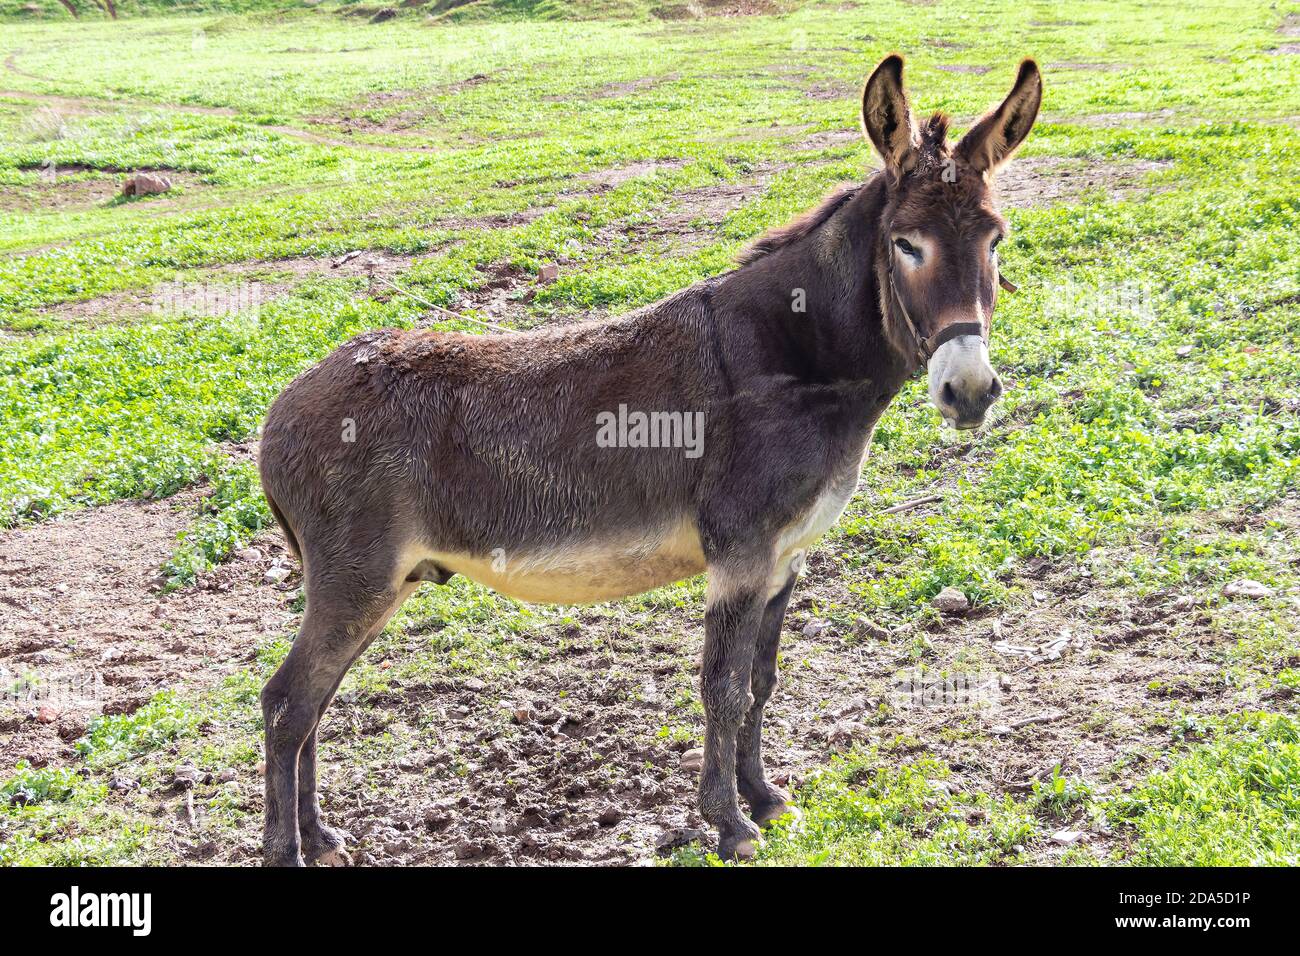 A Mule standing with nature background Stock Photo